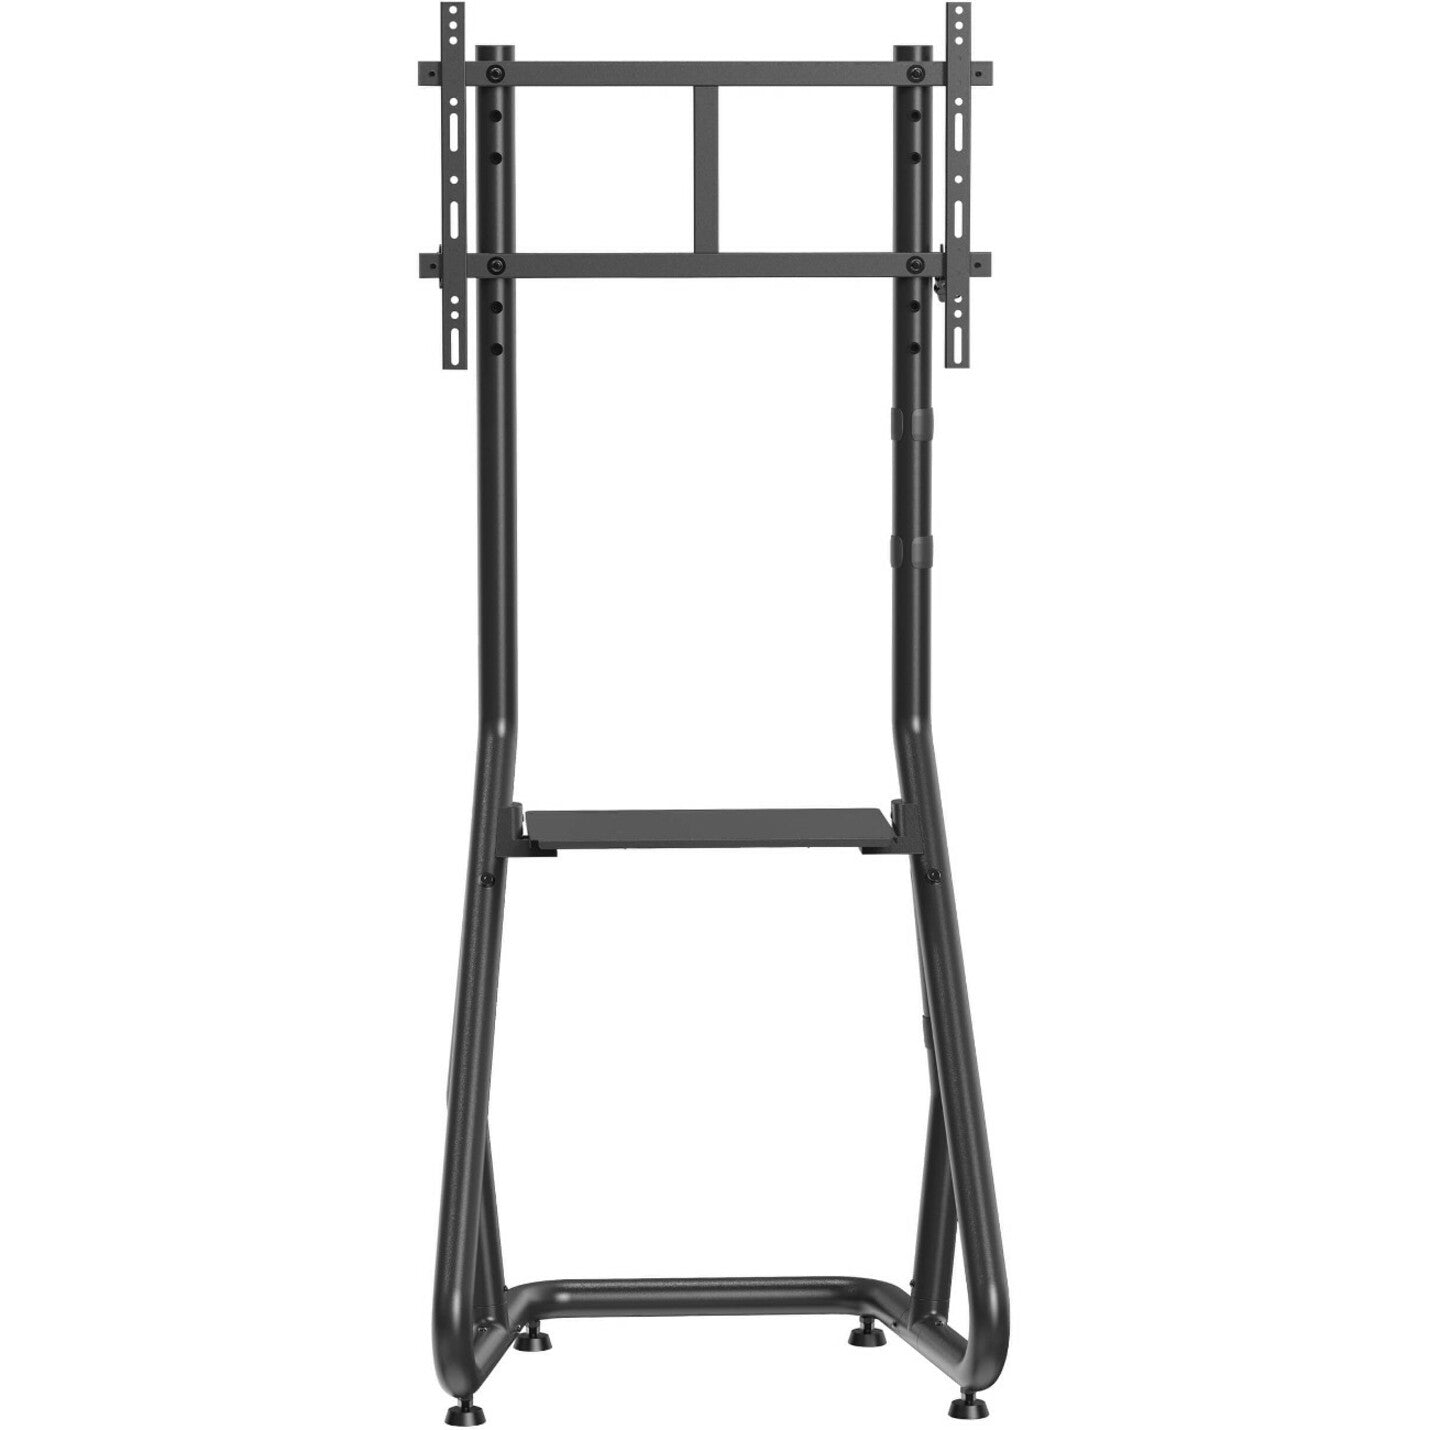 Tripp Lite DMCS3780HDS Heavy-Duty Streamline Digital Signage Stand for 37" to 80" Flat-Panel Displays, Security Lock, Adjustable Shelf, Cable Management